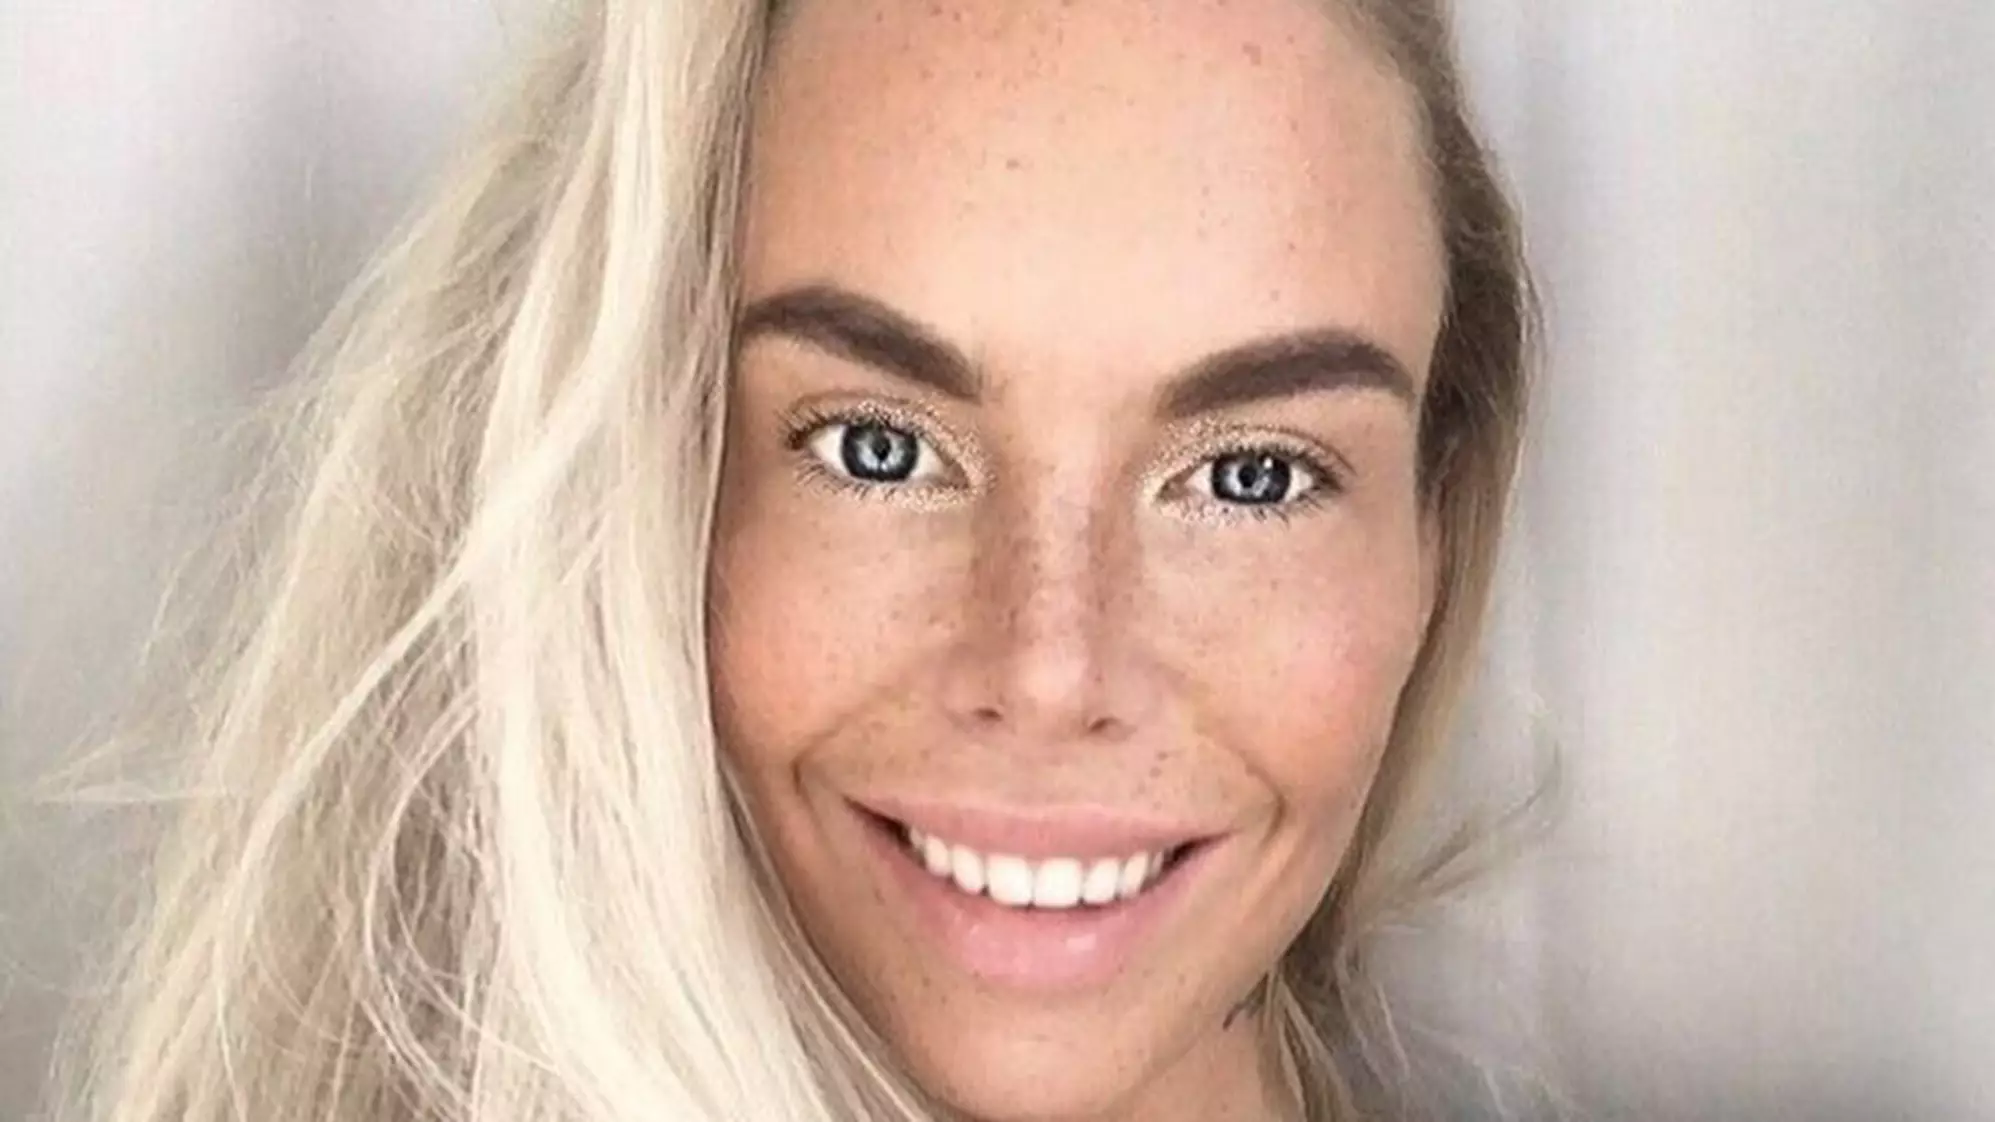 Swedish Model With 3 Foot 4 Inch Legs Reveals She Used To Be Bullied For Her Appearance